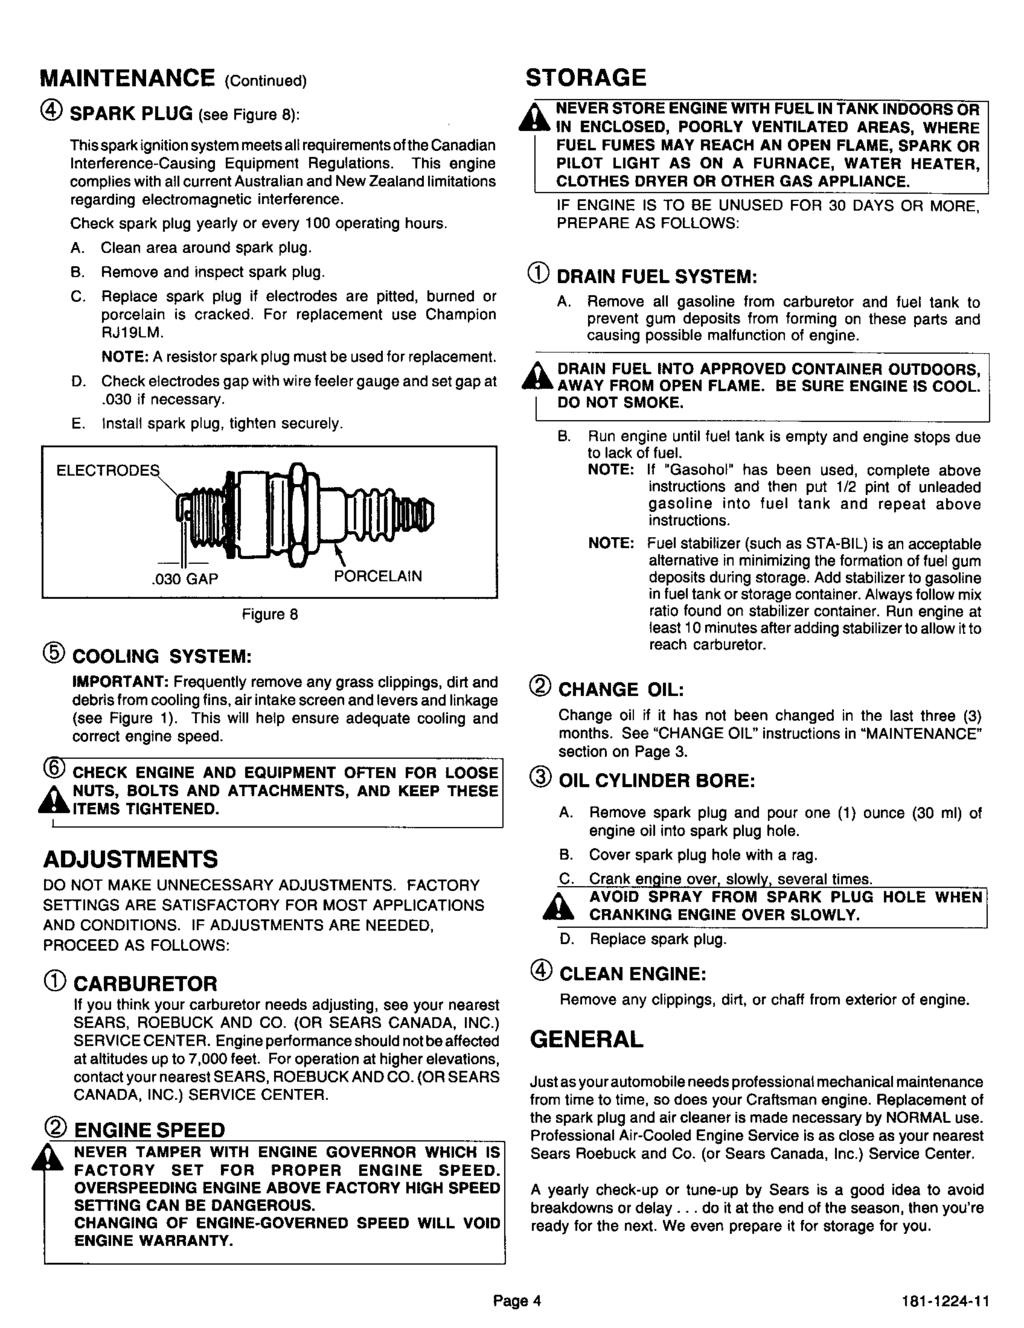 MAINTENANCE (Continued) STORAGE (_ SPARK PLUG (see Figure 8): This spark ignition system meets all requirements of the Canadian Interference-Causing Equipment Regulations.